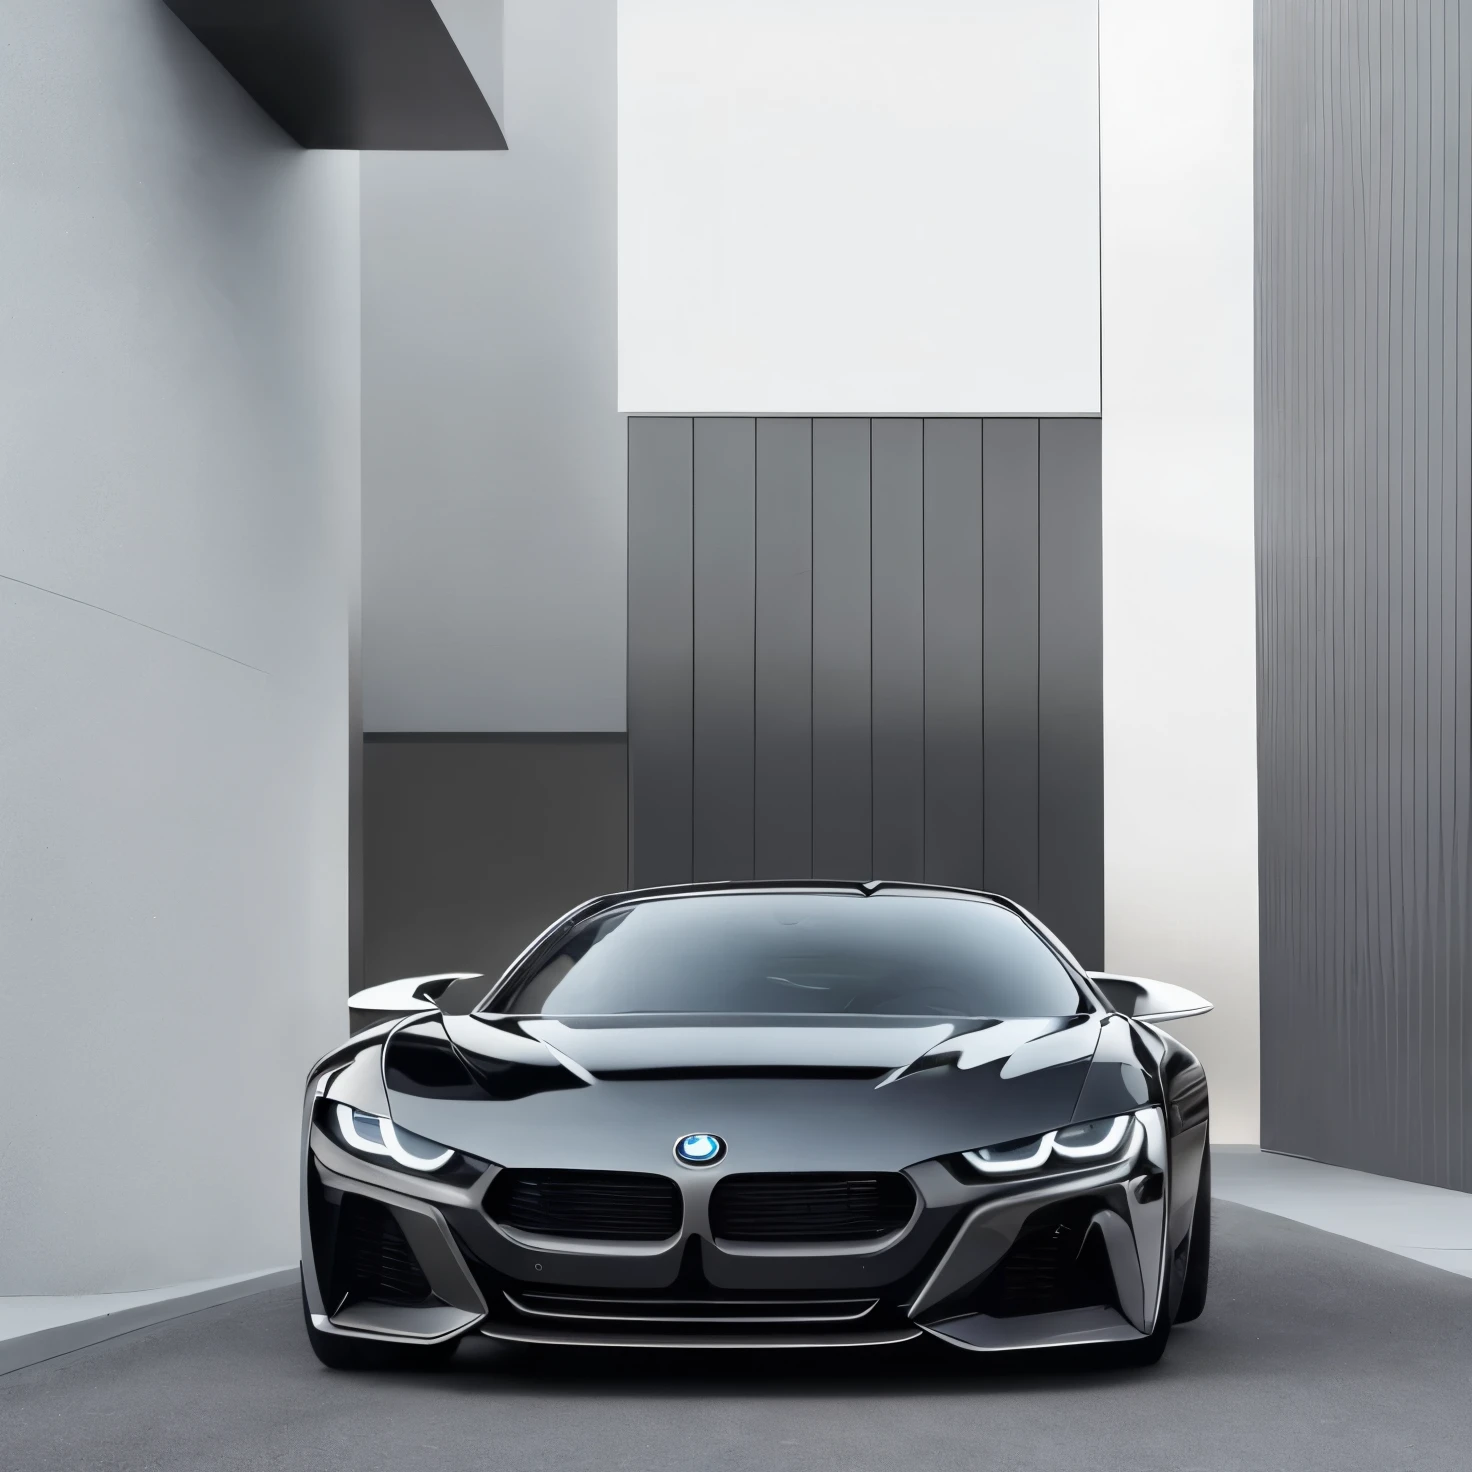 a far shot of a black sports car parked in front of a building, with sleek lines and a powerful, modern minimalist f 2 0, cinematic body shot, bmw ultra concept cars, front profile shot, luxury hd render, high-quality render, bmw m1 lincoln continental, modern minimalist f 2 0 clean, black car, front view dramatic, bmw i 8